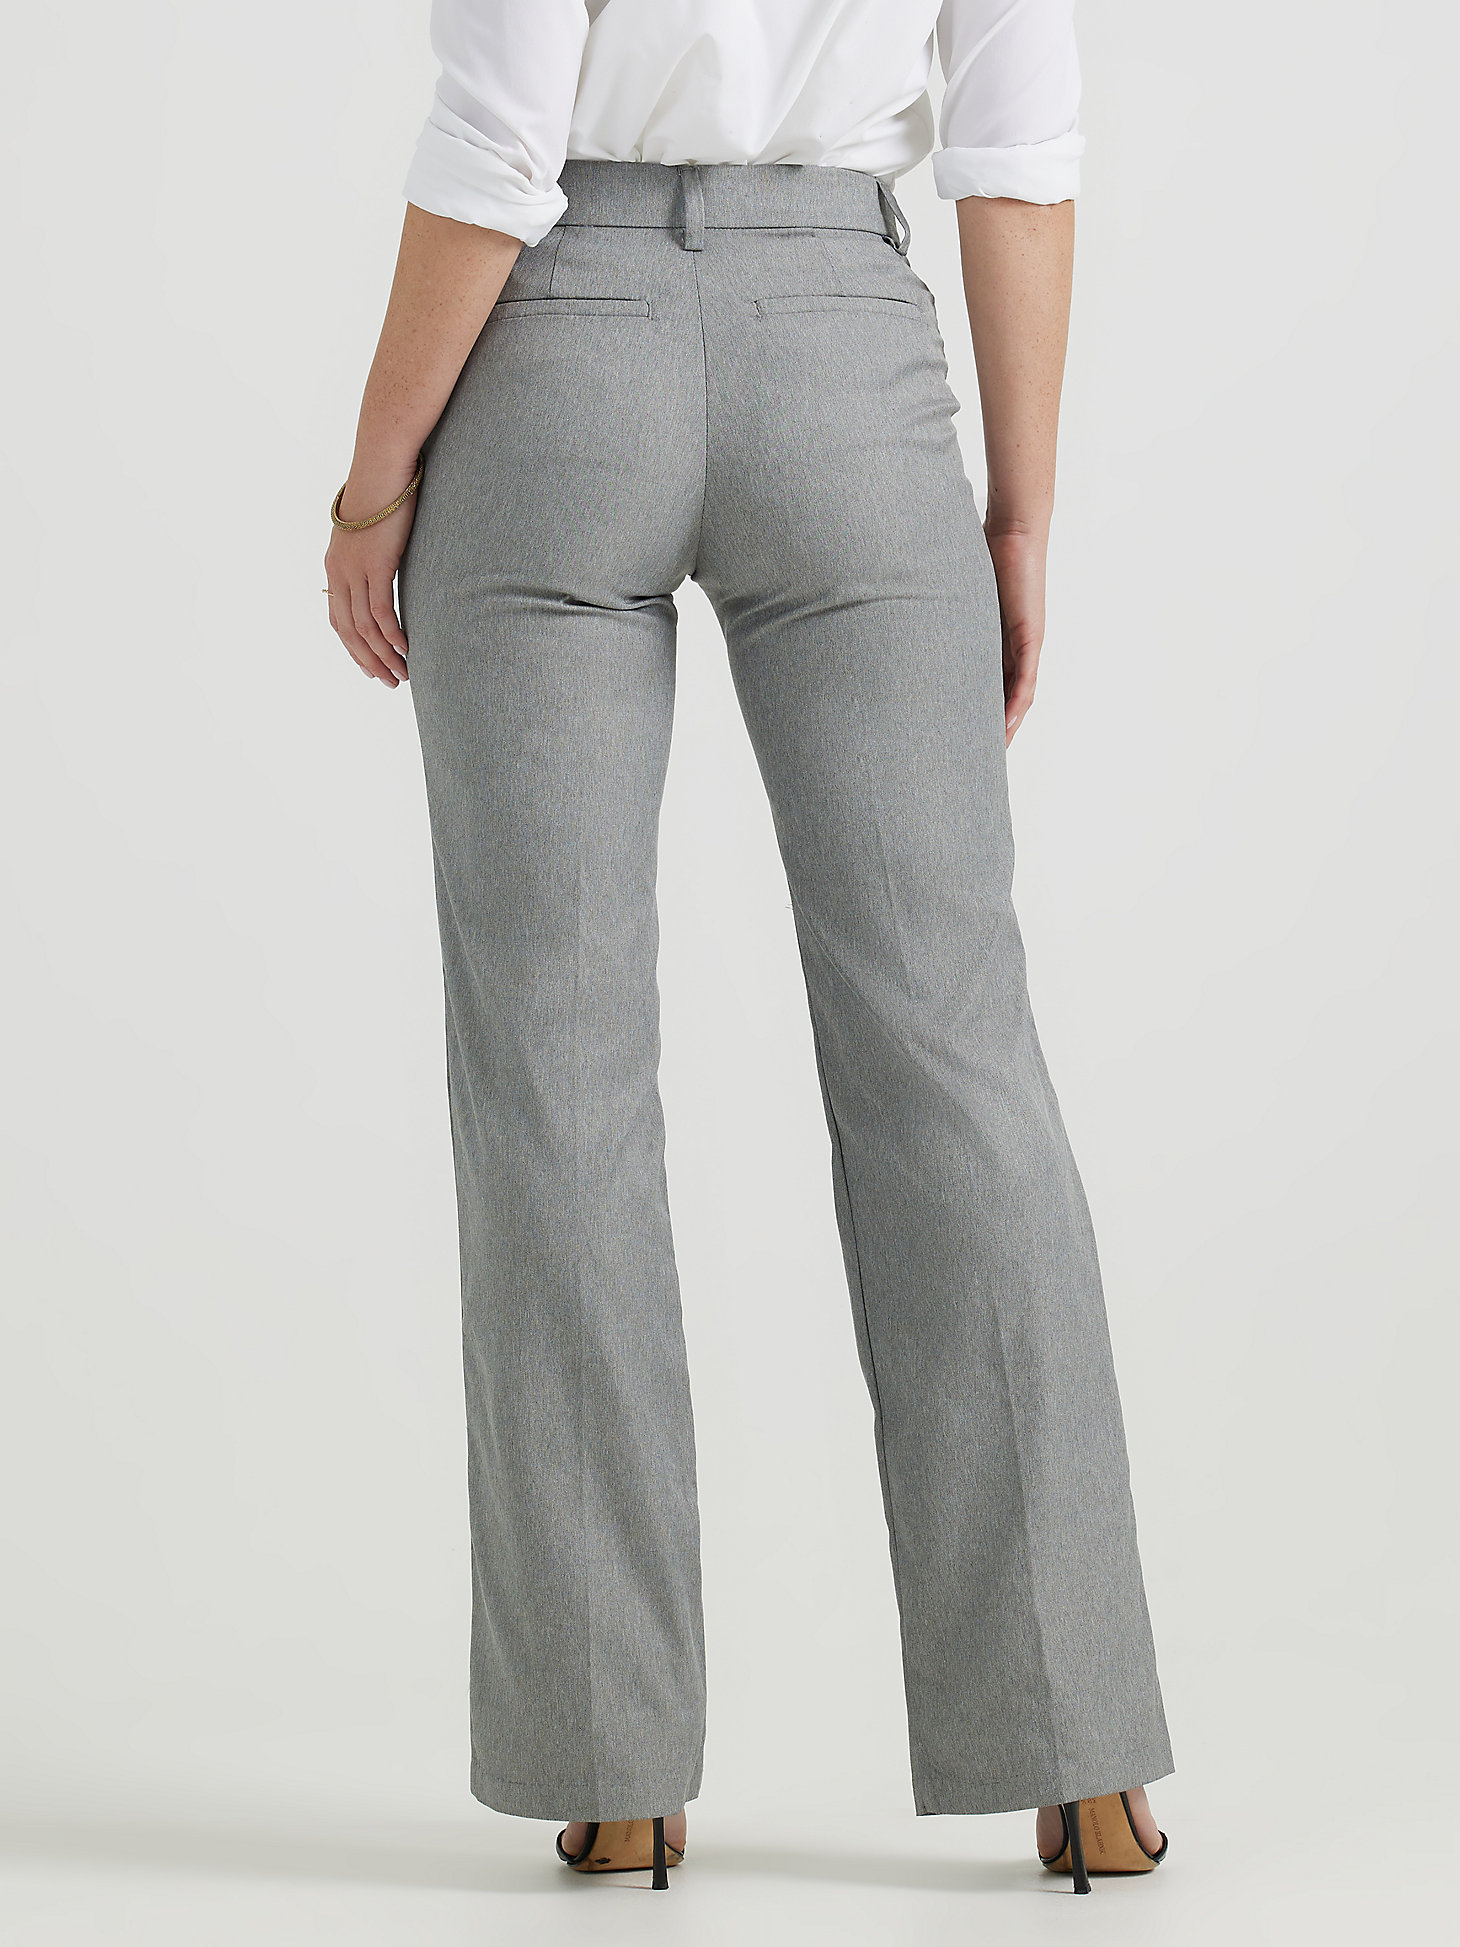 Women's Ultra Lux with Flex Motion Regular Fit Trouser Pant in Ash Heather alternative view 2